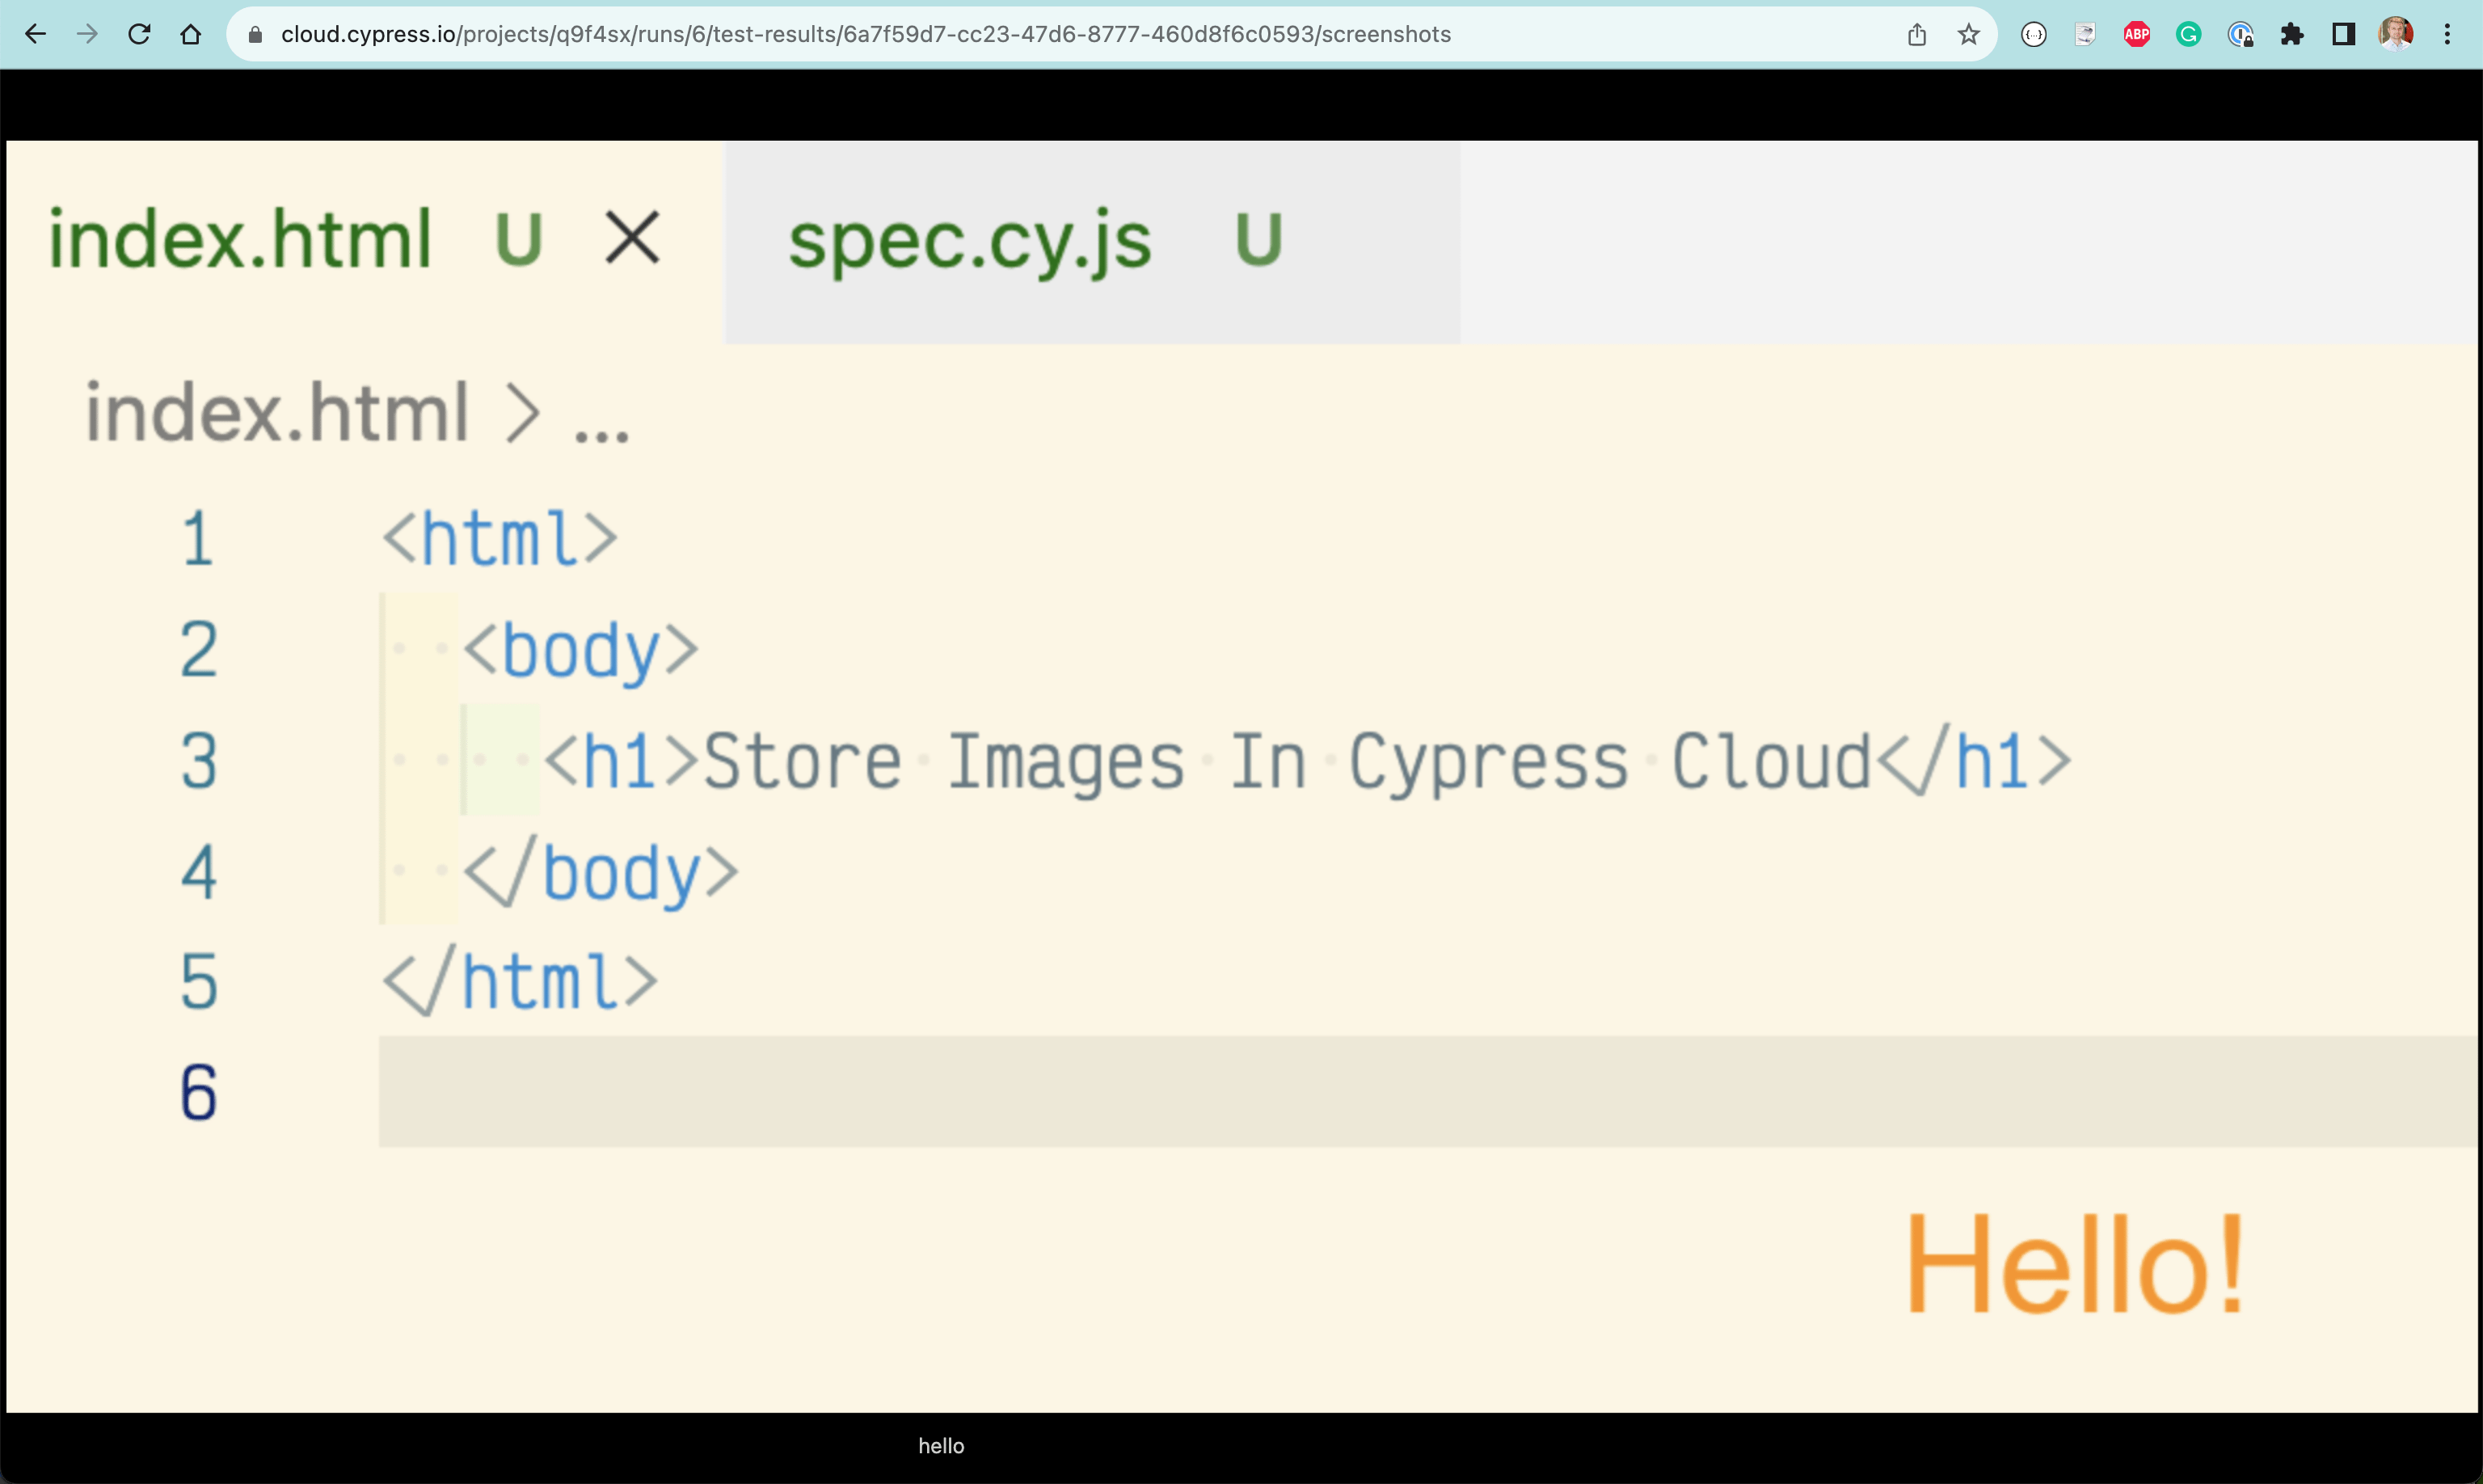 Our Hello image stored on the Cypress Cloud as a screenshot